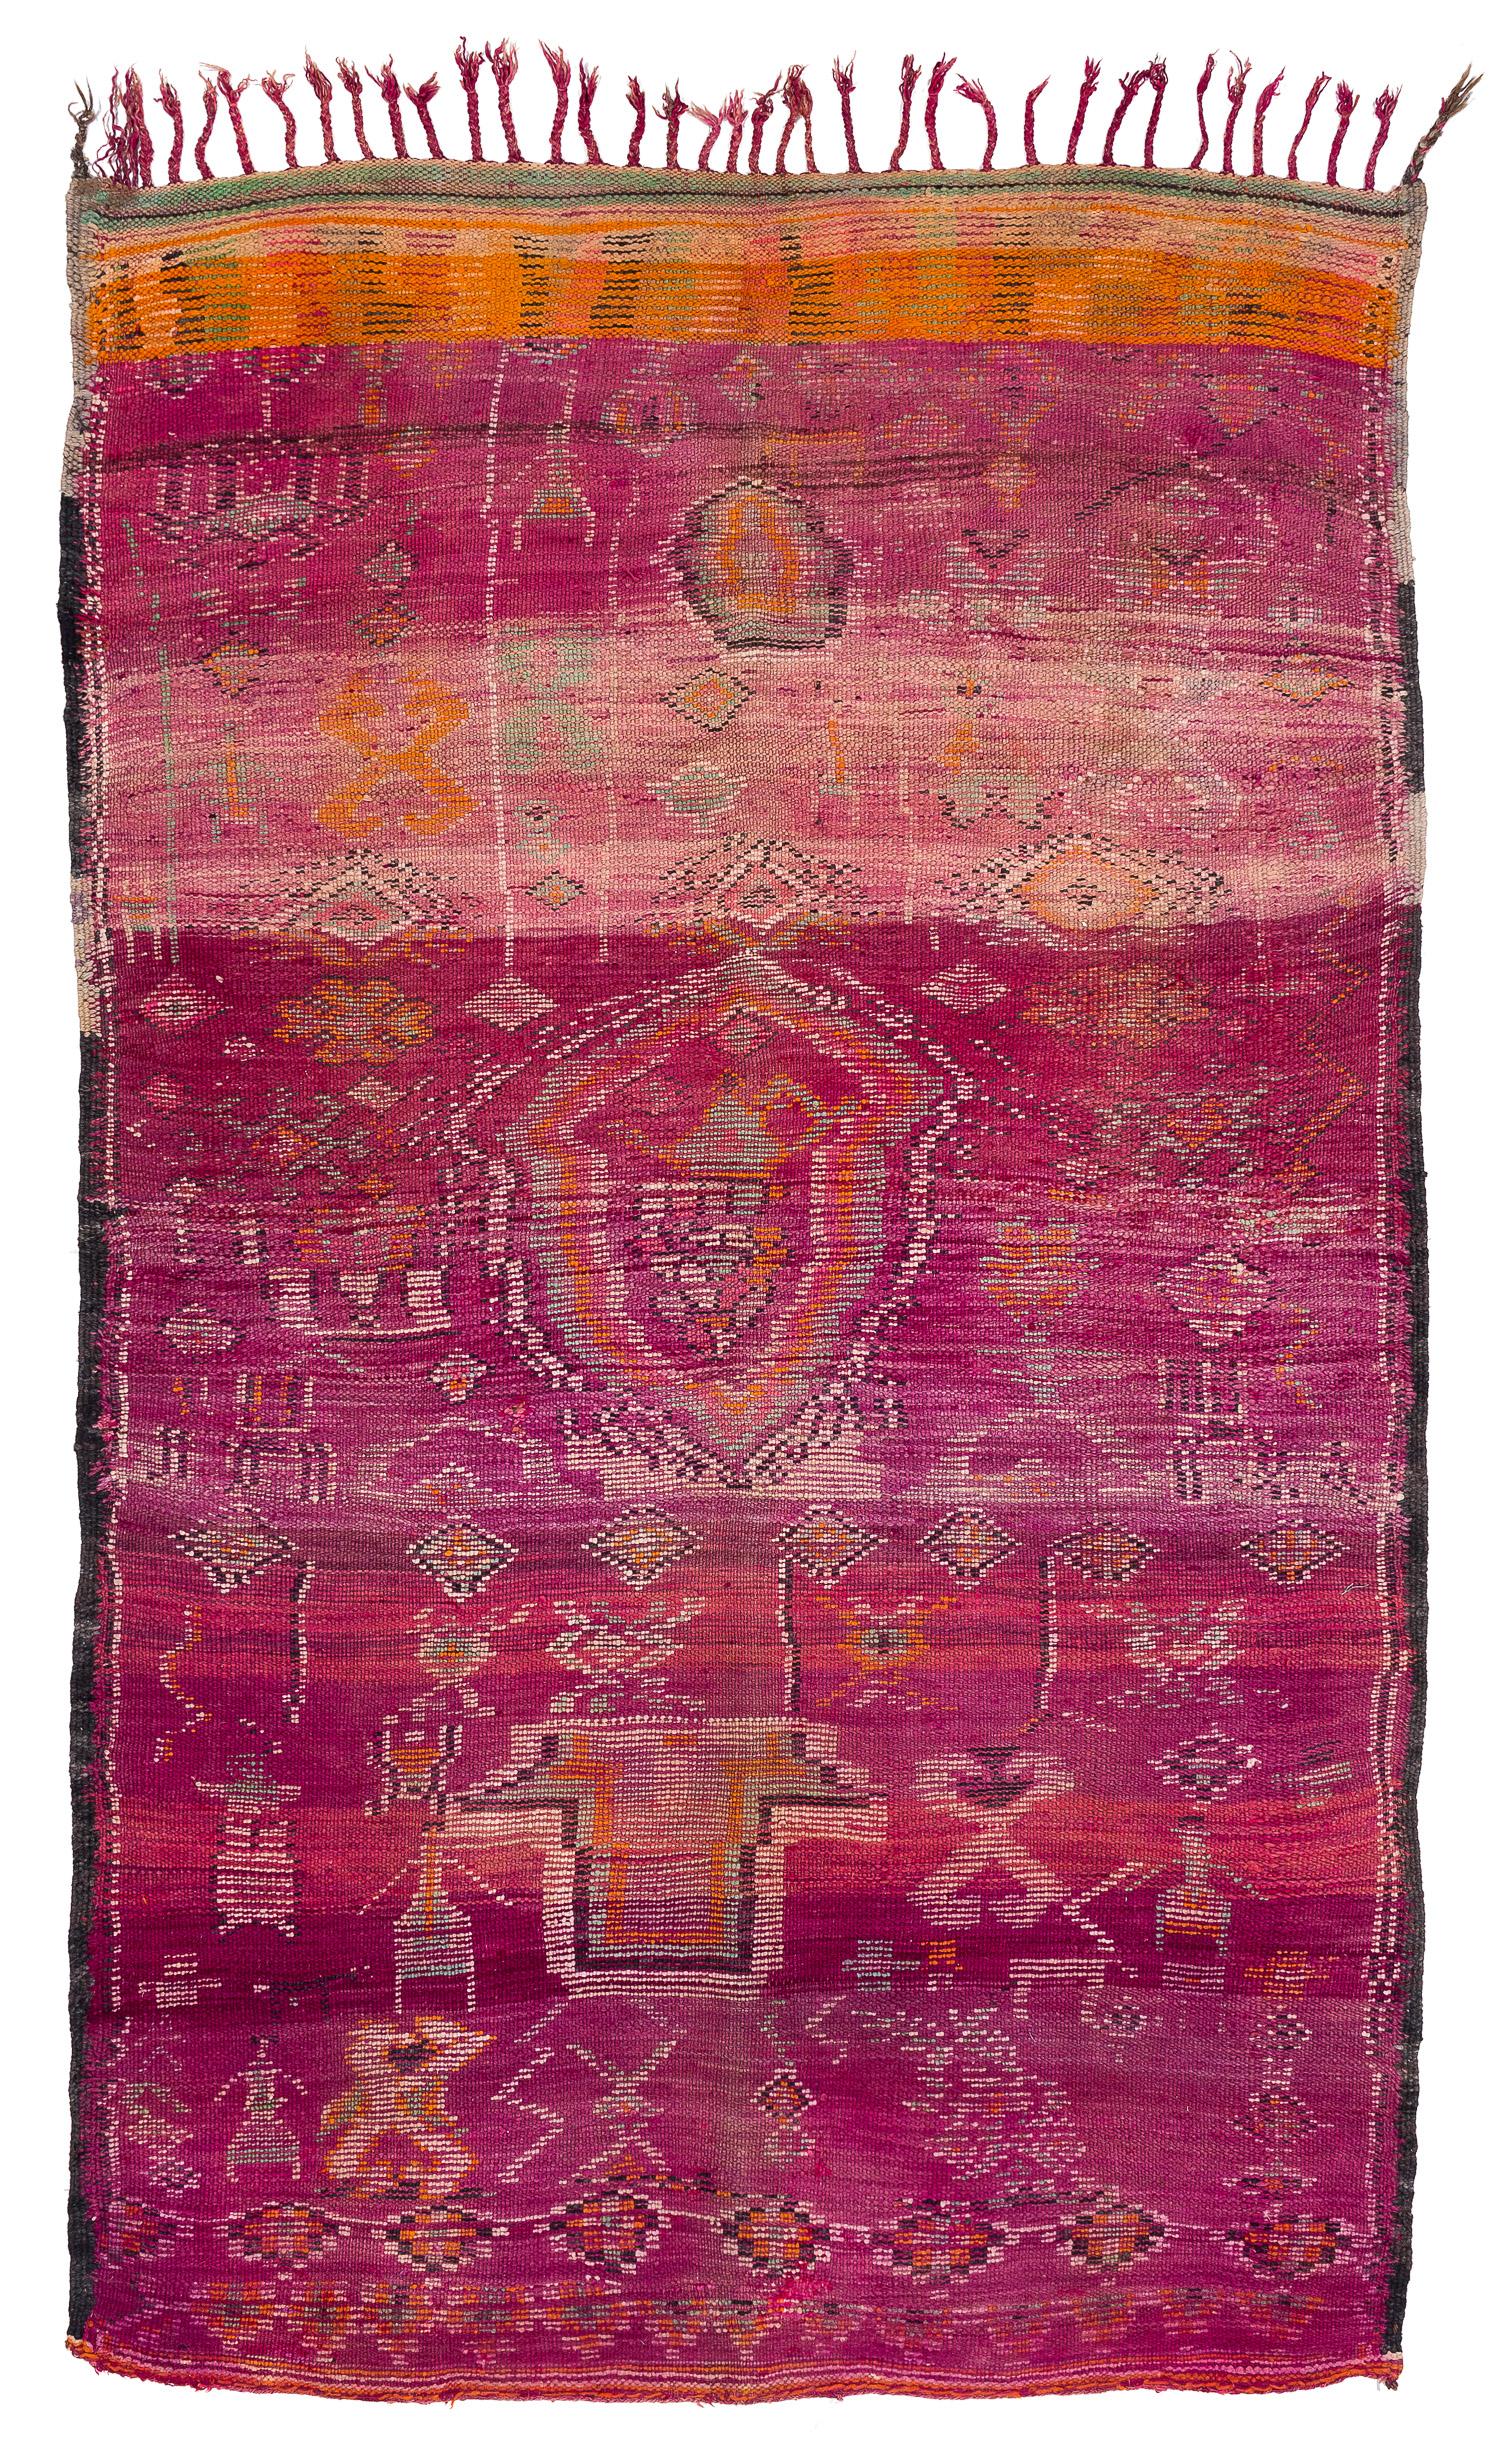 A vintage Boujad Moroccan rug circa 1960. this is an incredible rug woven in beautiful colors. You can see figures of men, women, and animals throughout the design. It is a very desirable rug - a real piece of Folk Art! Measures: 5'1'' x 8'4''.